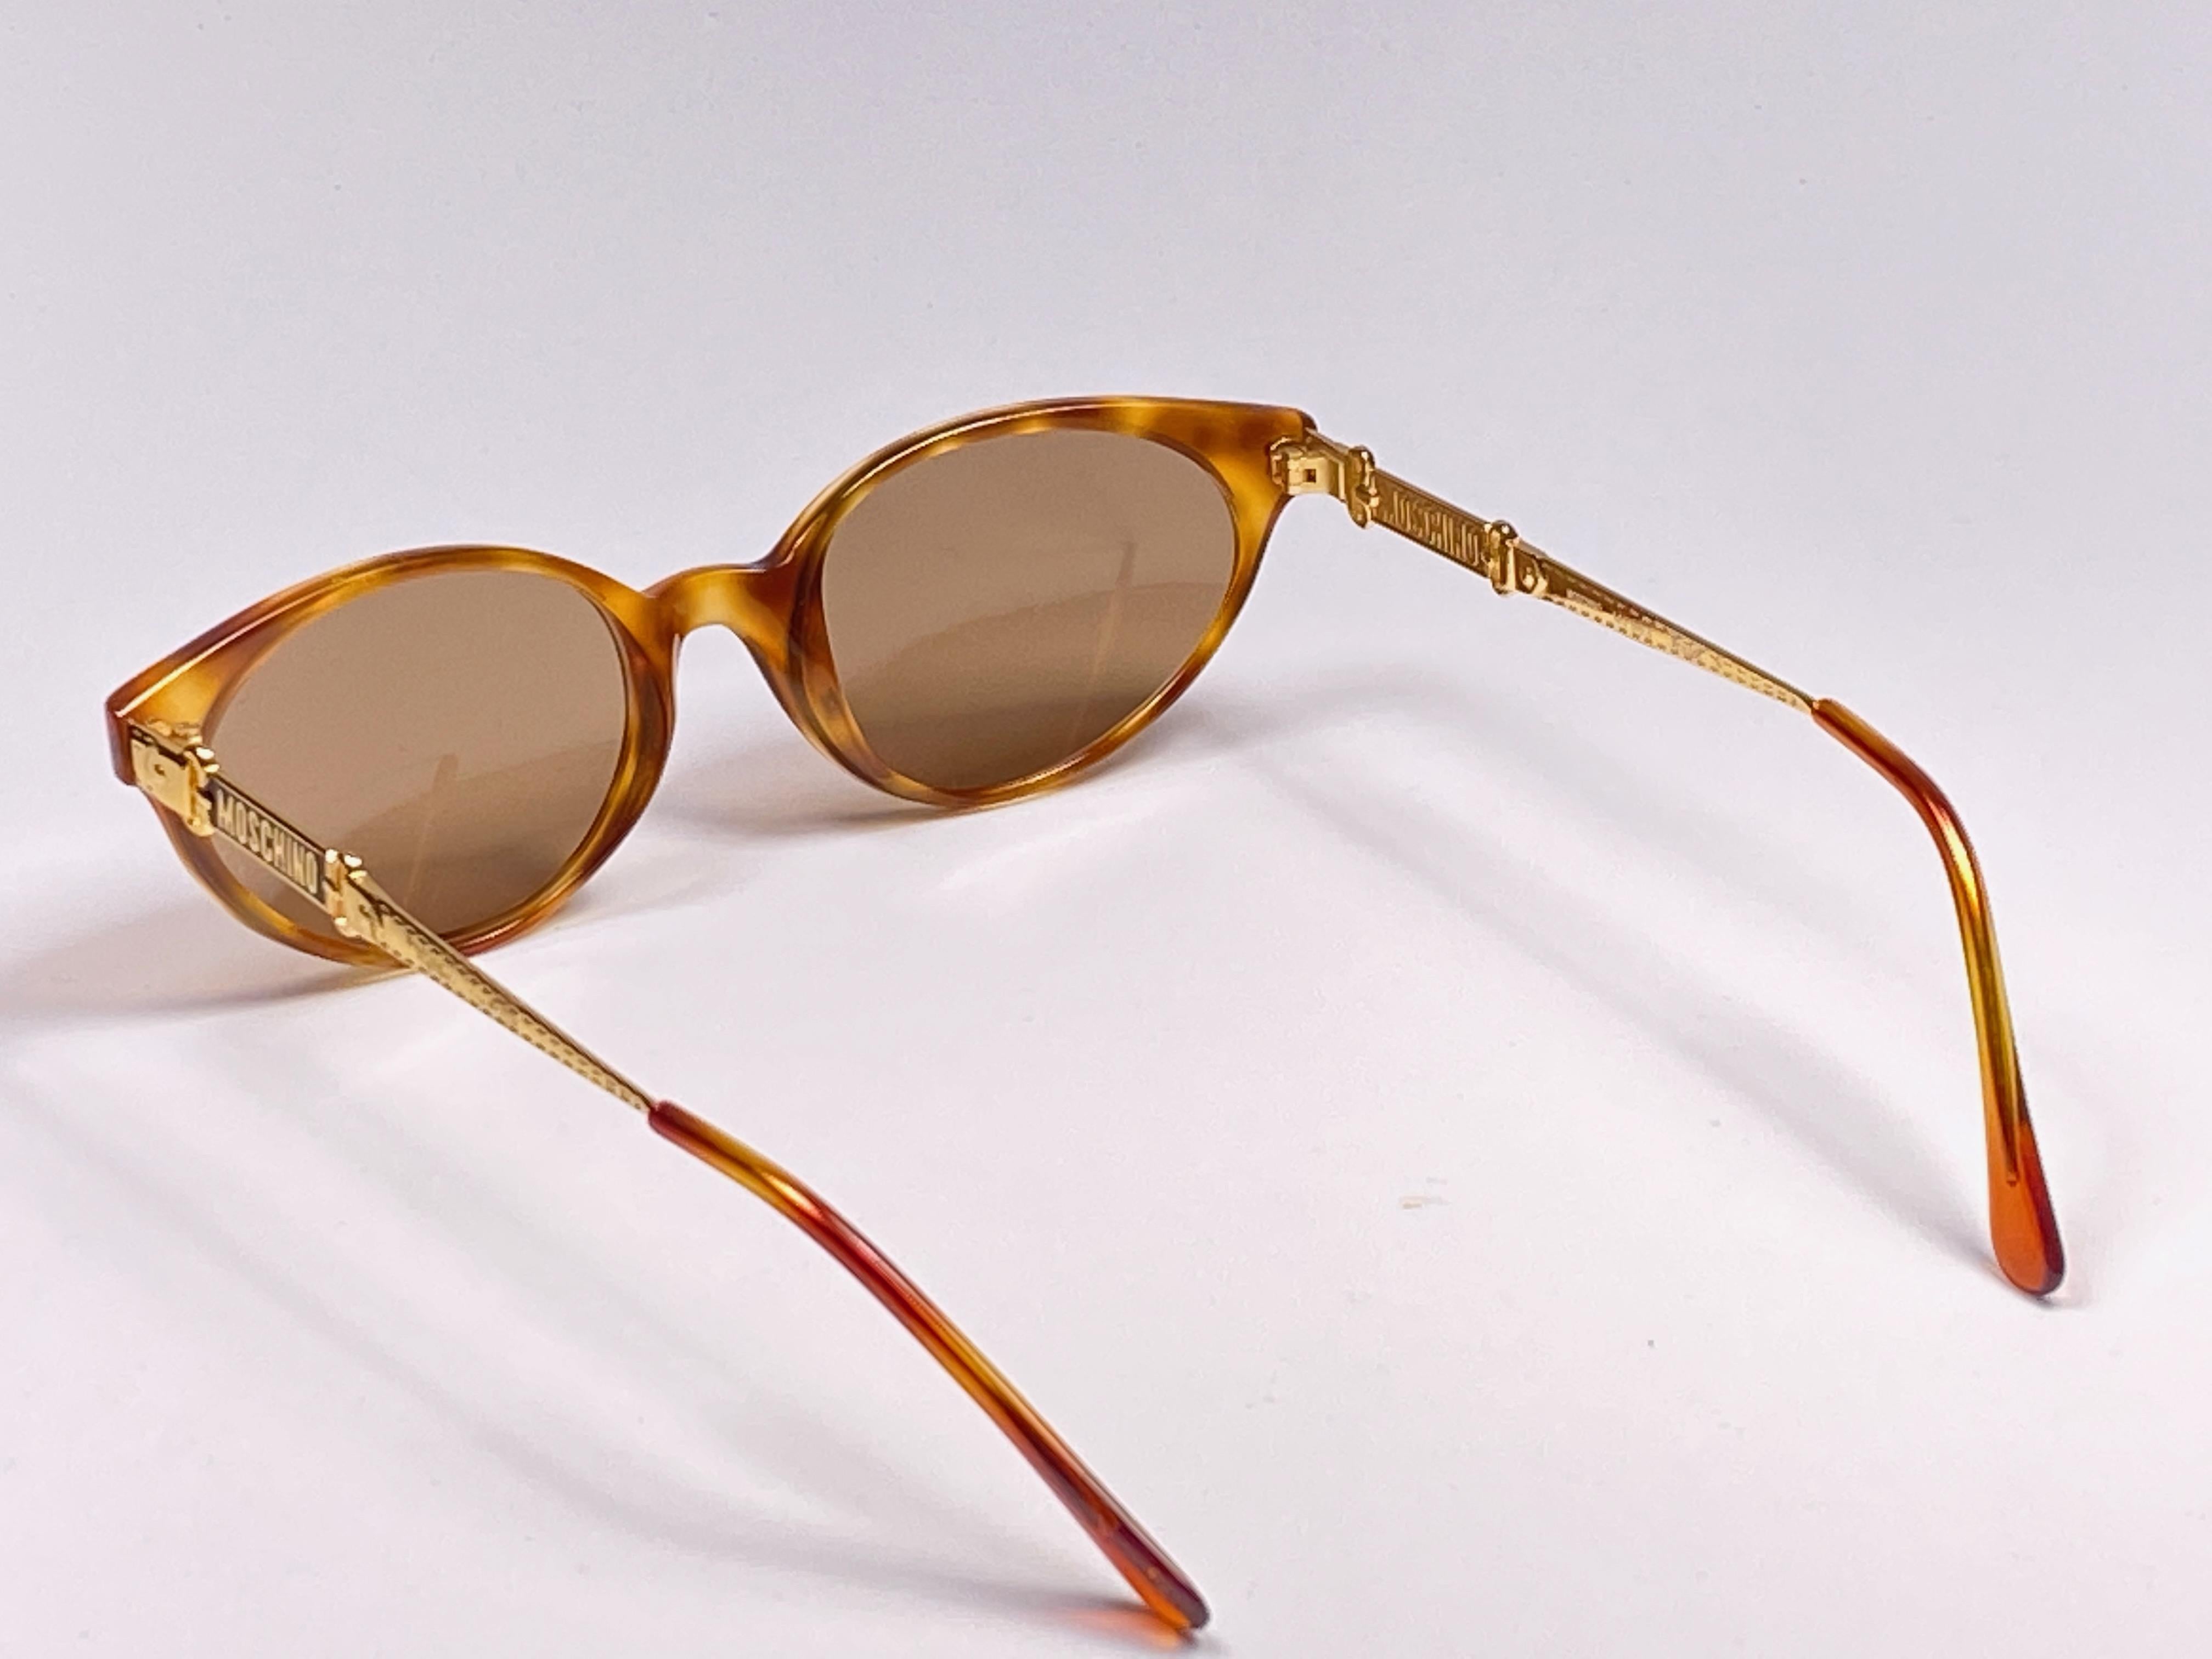 Women's or Men's New Vintage Moschino By Persol Tortoise MF963 Cat Eye Sunglasses Made in Italy For Sale